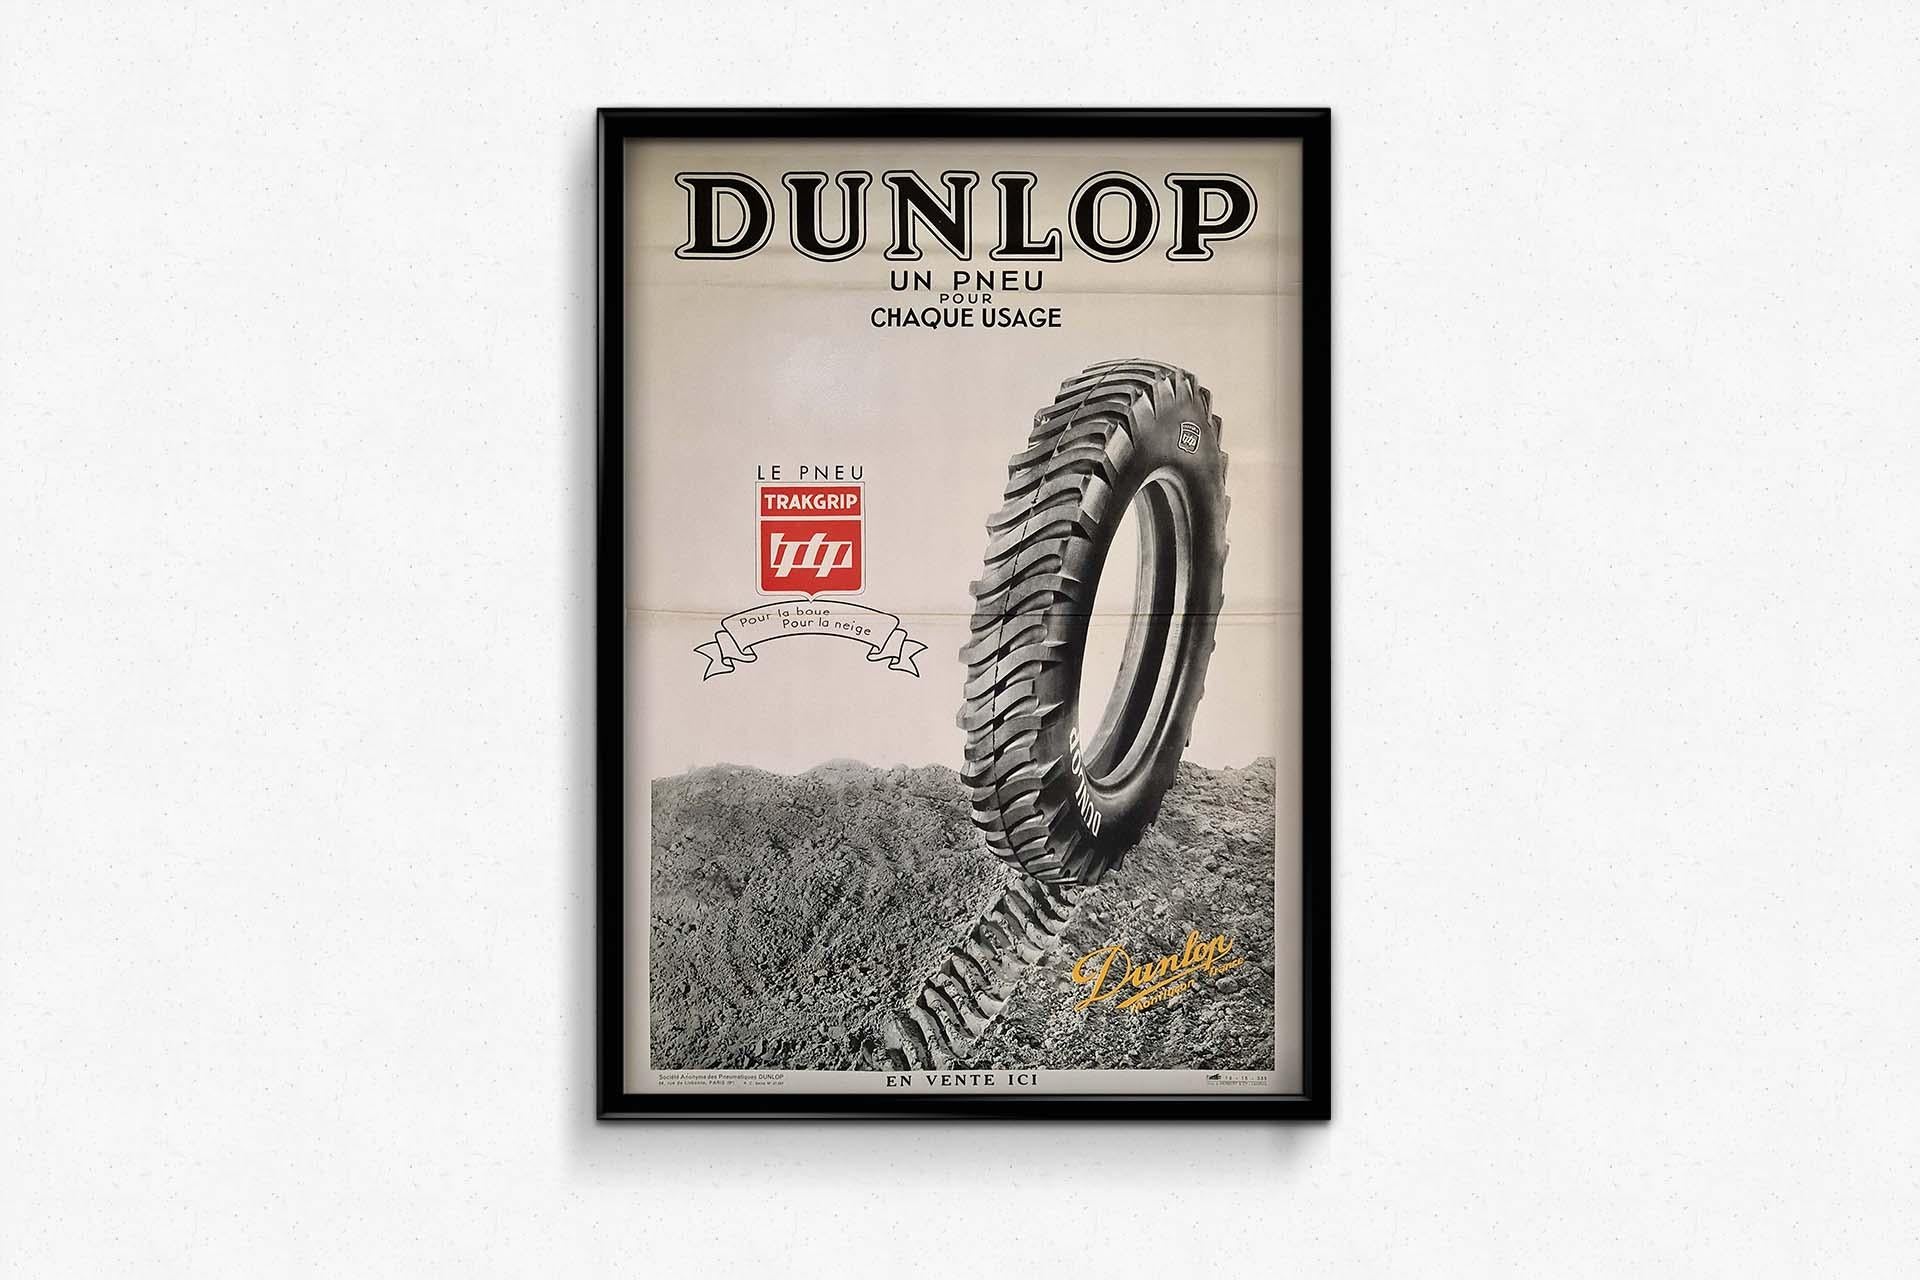 The 1935 original advertising poster for Dunlop introduces audiences to the innovative Tire Trakgrip, a groundbreaking tire designed to meet the diverse needs of drivers. Printed by J. Herbert & Cie in Levallois, this poster showcases Dunlop's